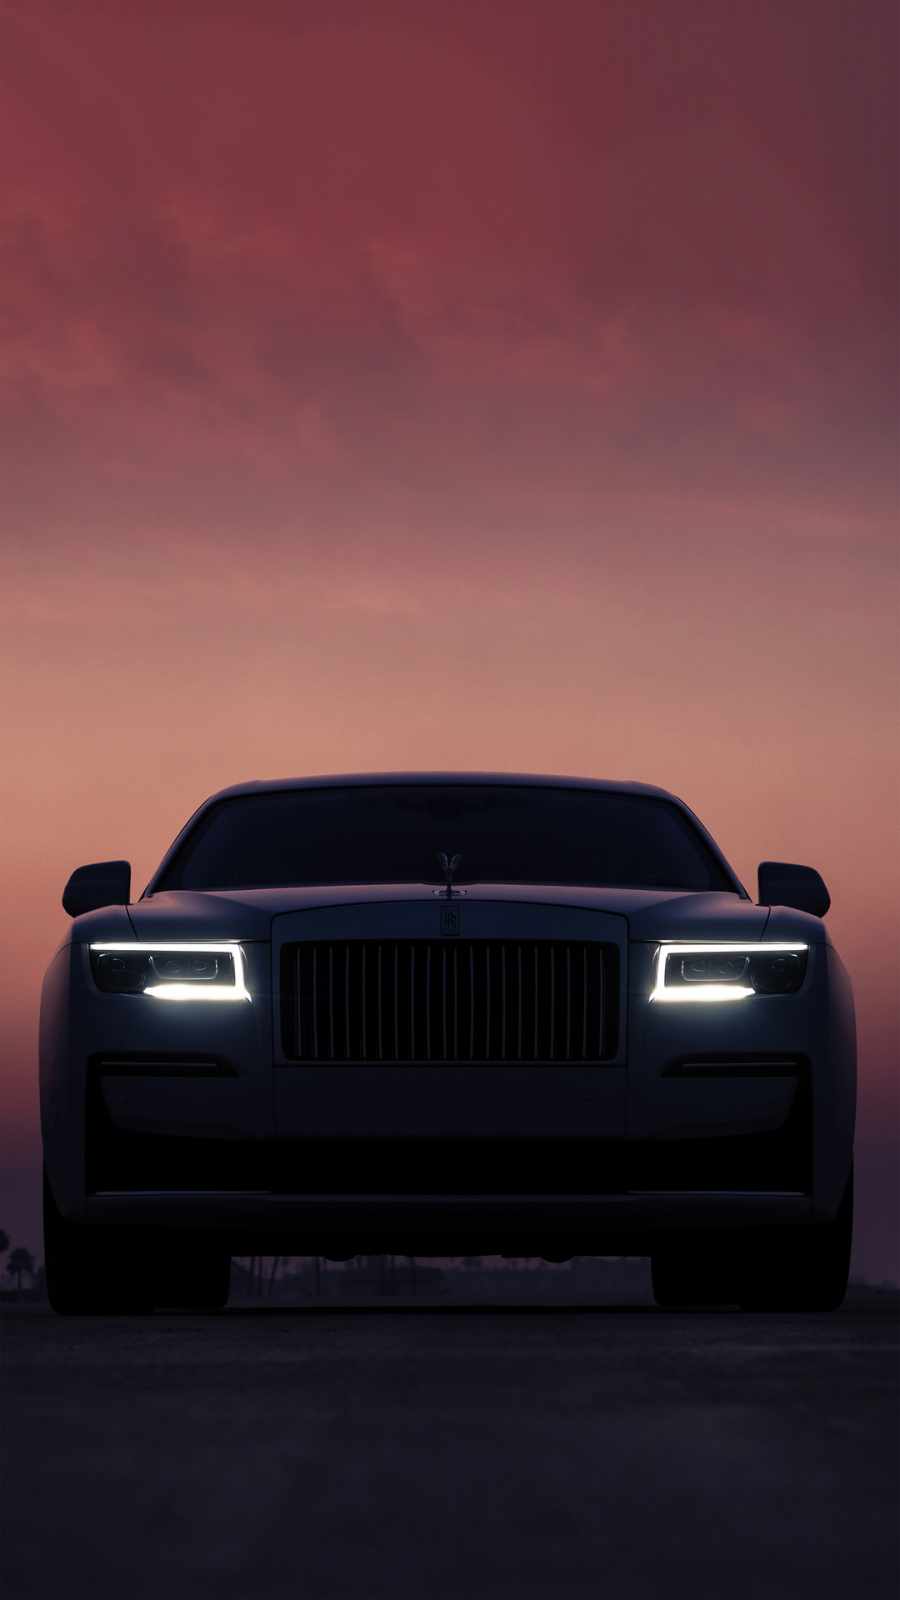 Rolls Royce Ghost - IPhone Wallpapers : iPhone Wallpapers